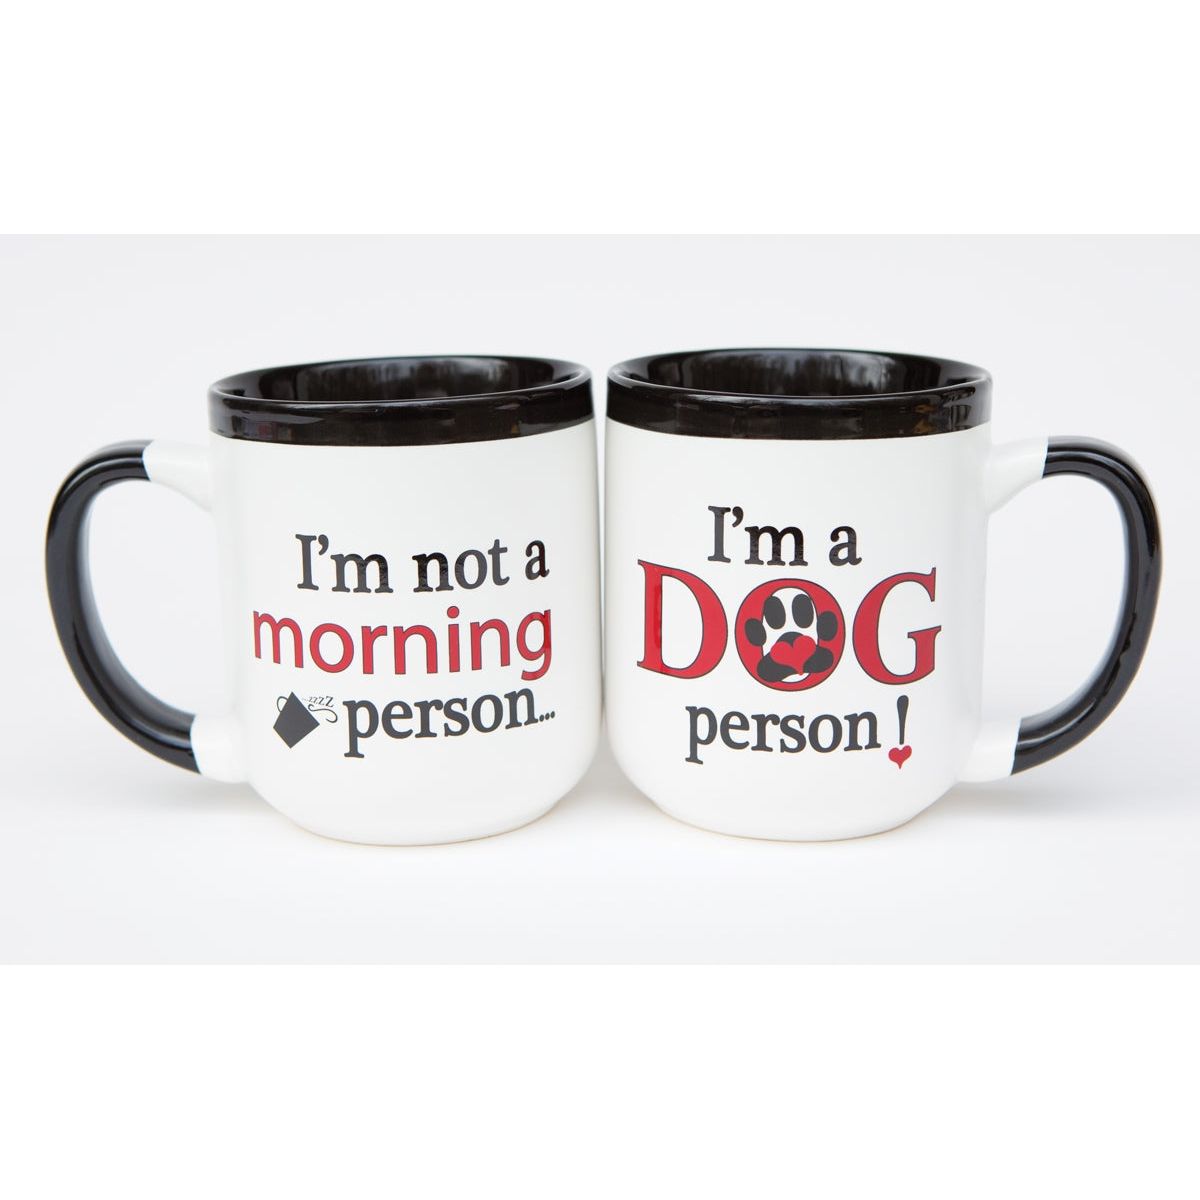 White ceramic mug with black handle and rim. "I'm not a morning person" on front and "I'm a DOG Person" on back.